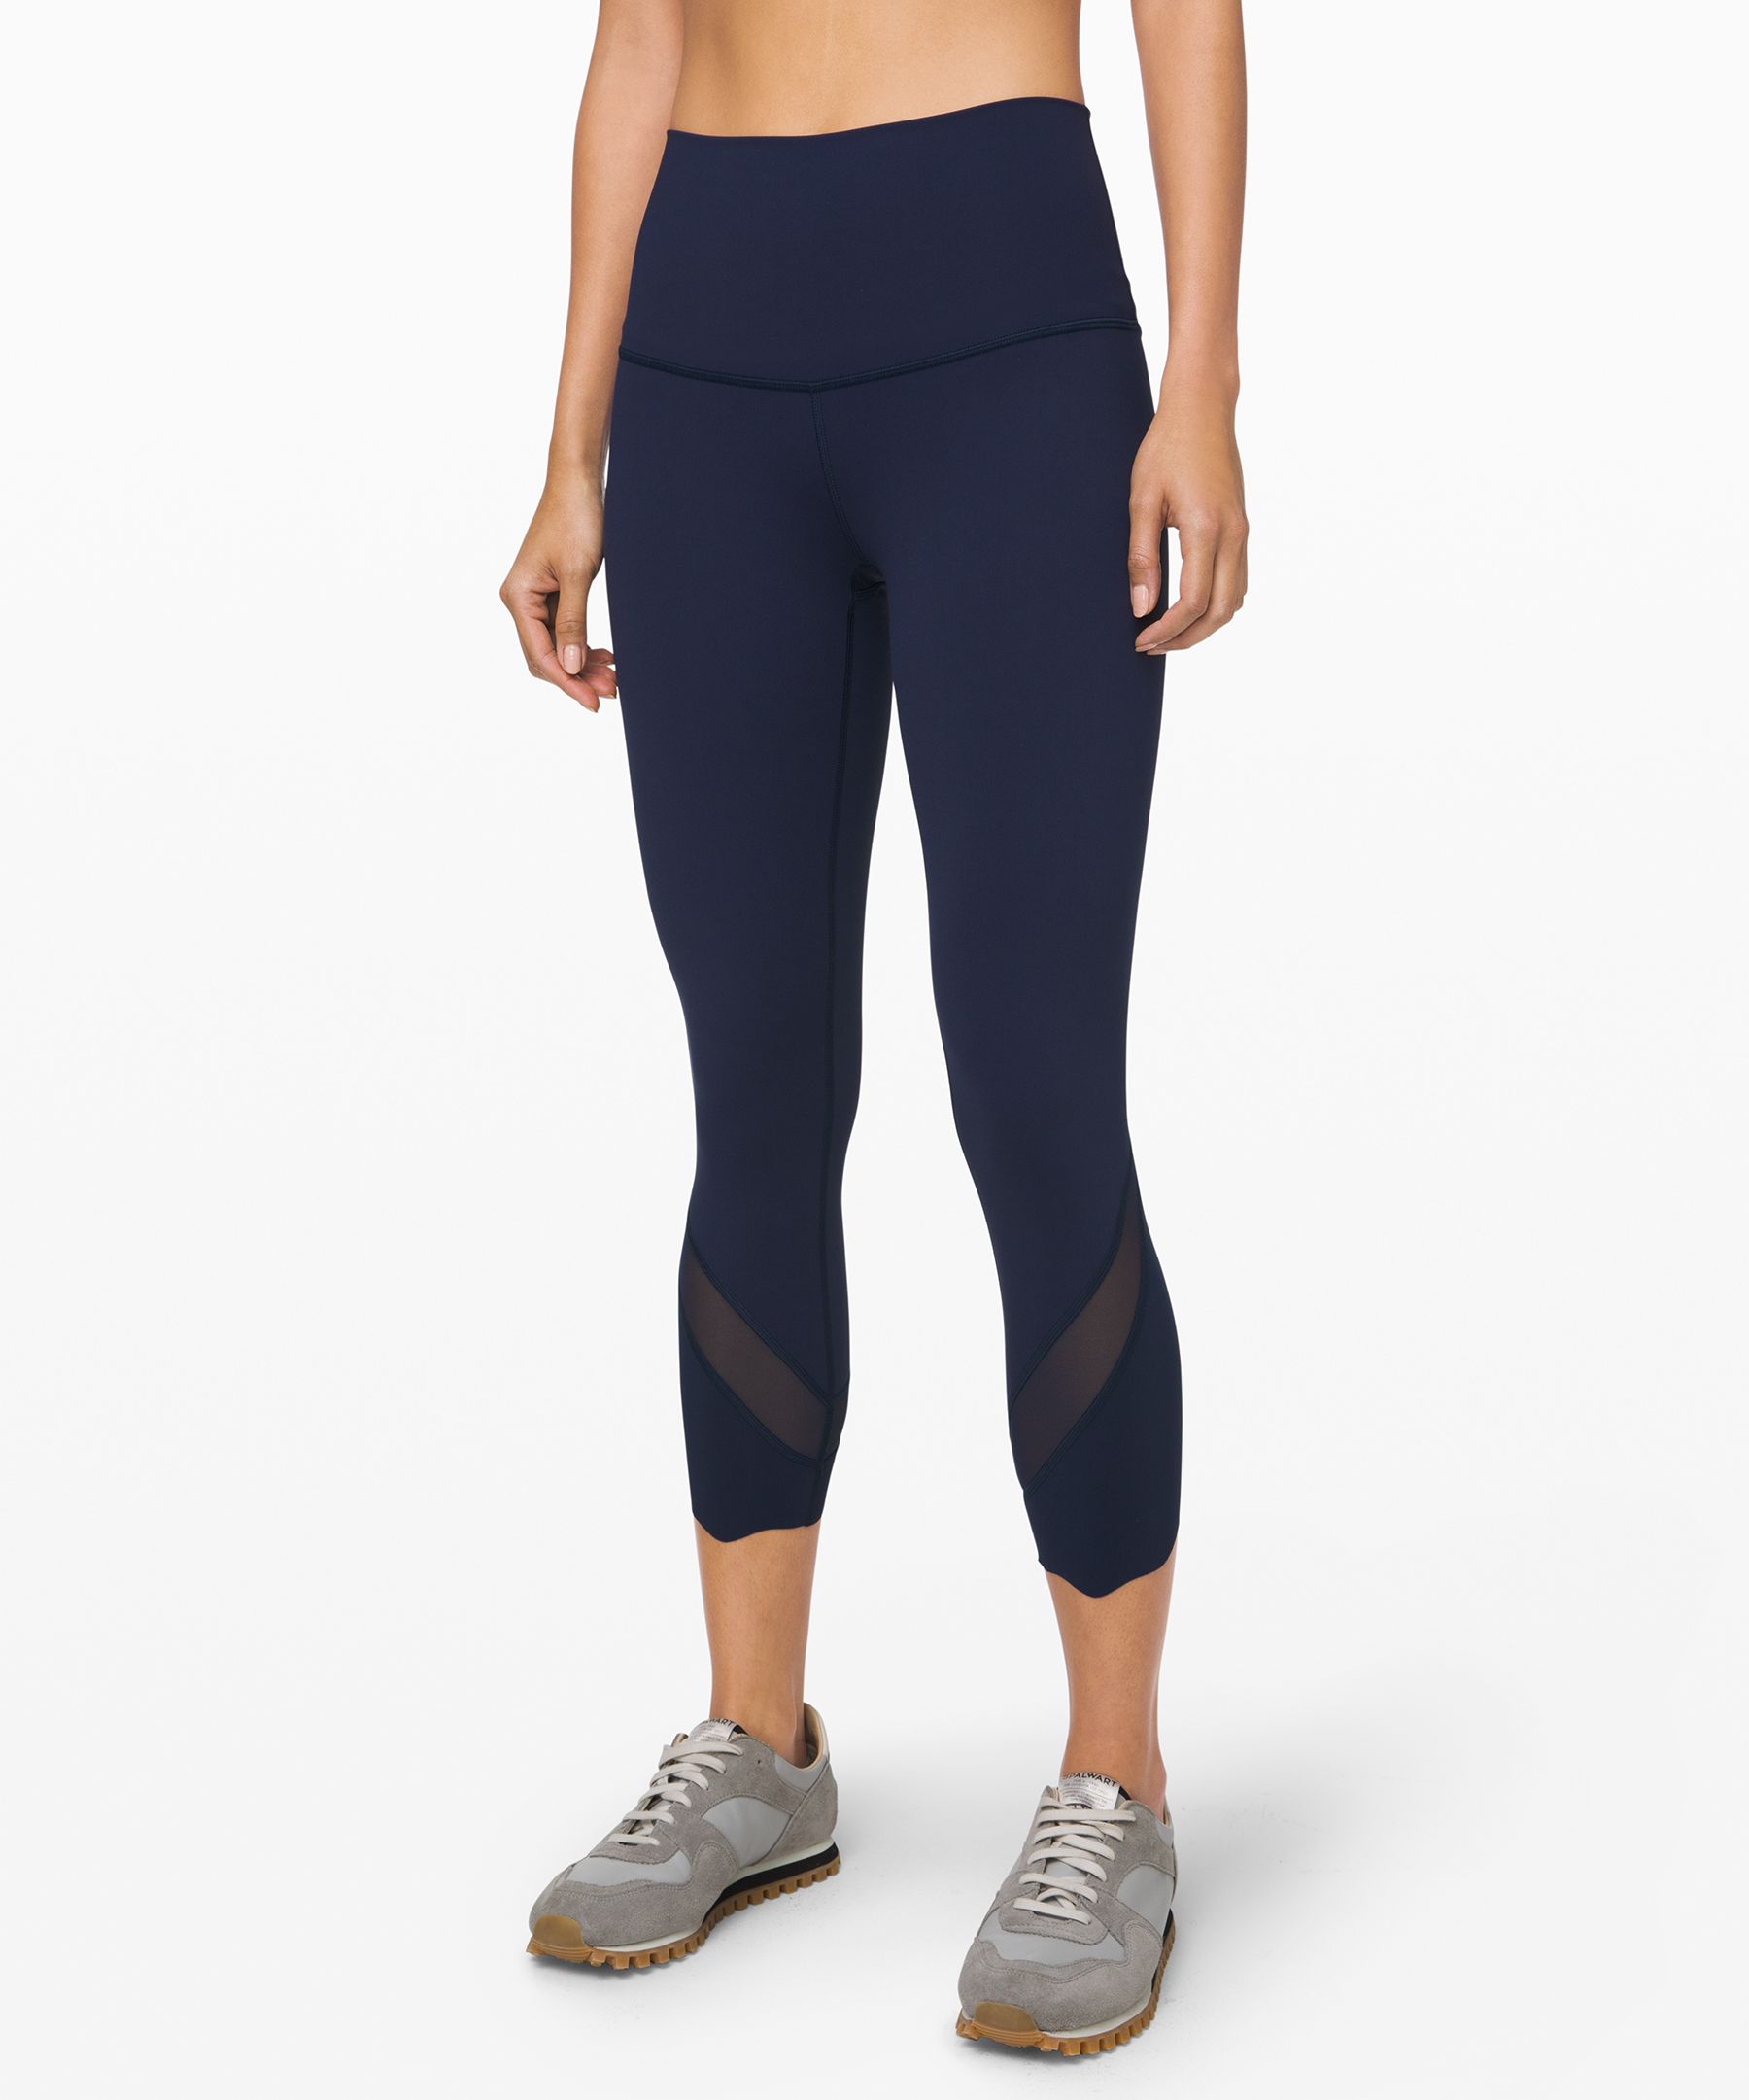 Lululemon Wunder Under Crop High-Rise *Roll Down Scallop Full-On Luxtreme  23 – I BUY YOGA